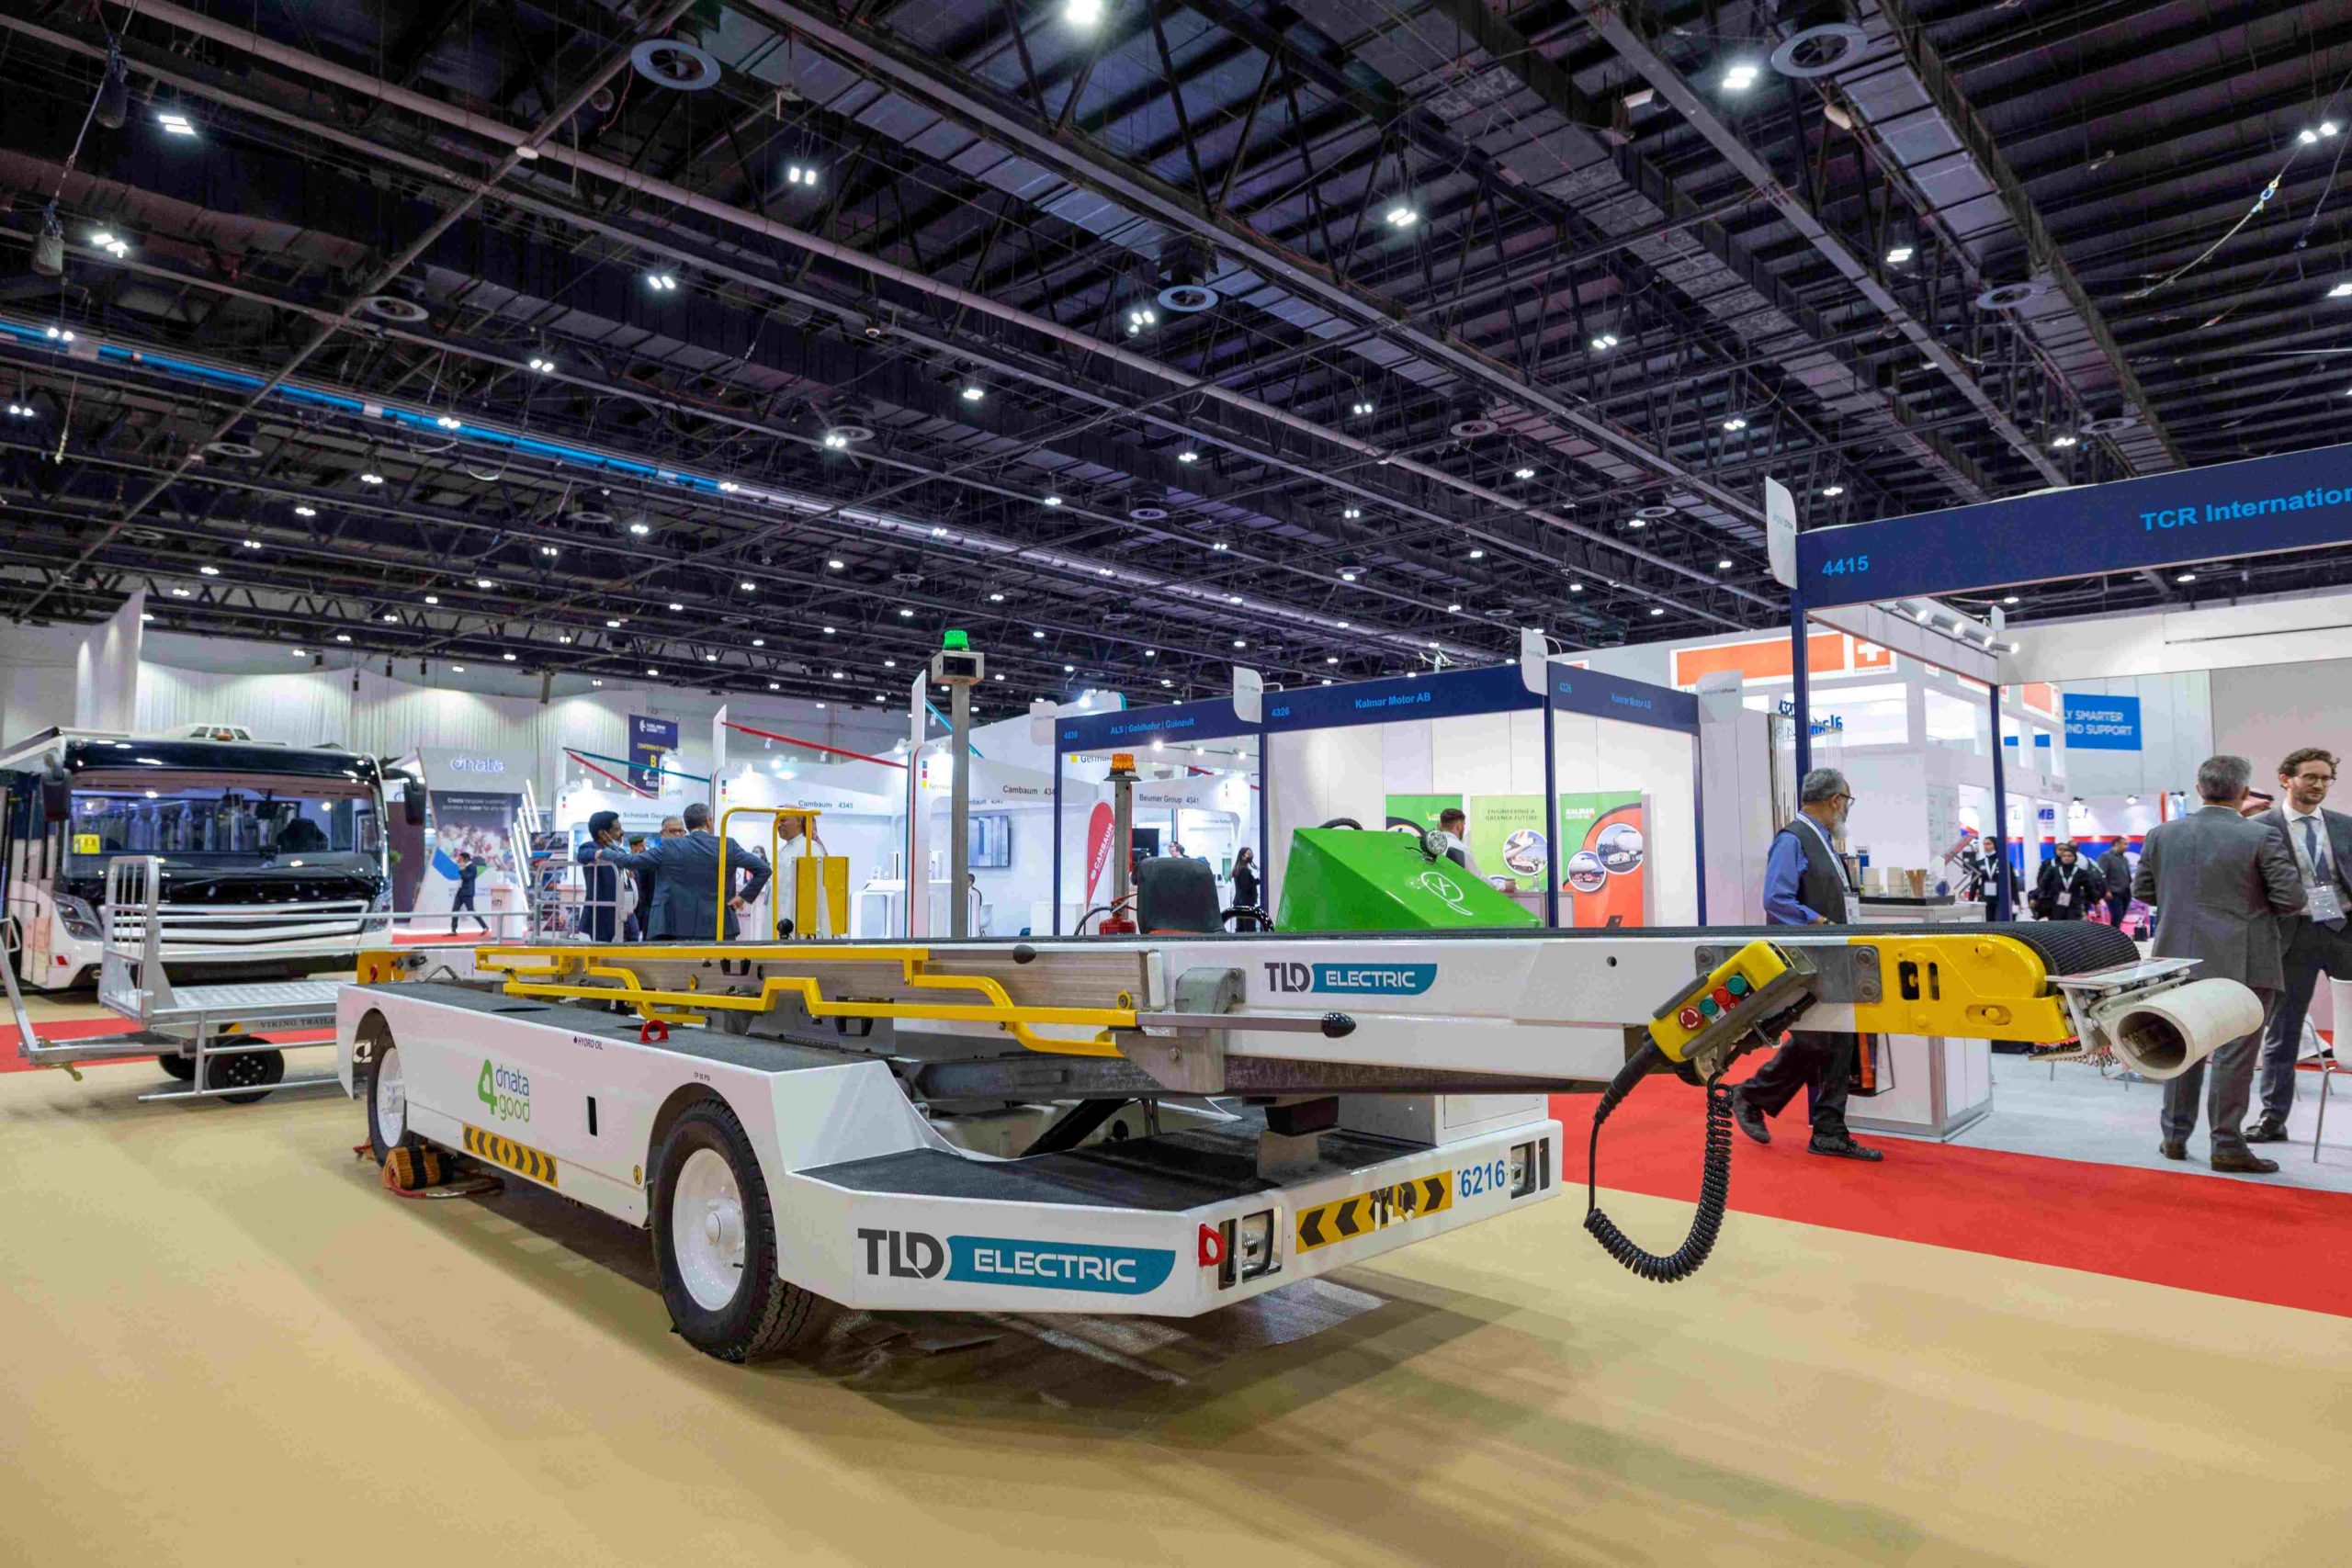 Image for dnata To Replace All Vehicles And Equipment With Electric Units In Sustainability Push